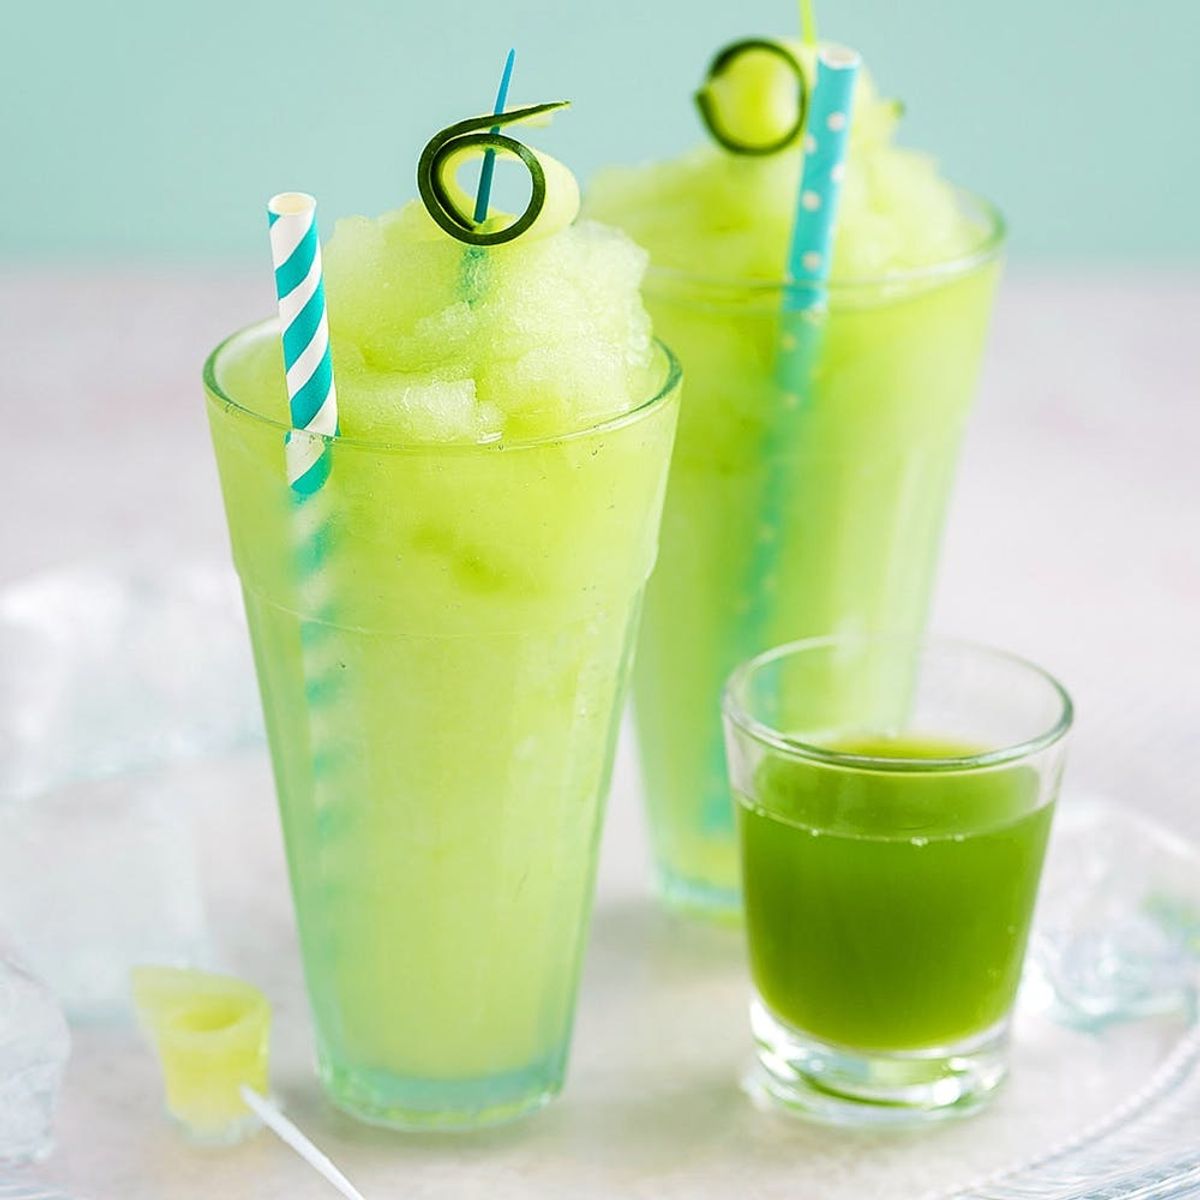 This Cucumber Gin Slushie Is the Only Summer Drink You Need